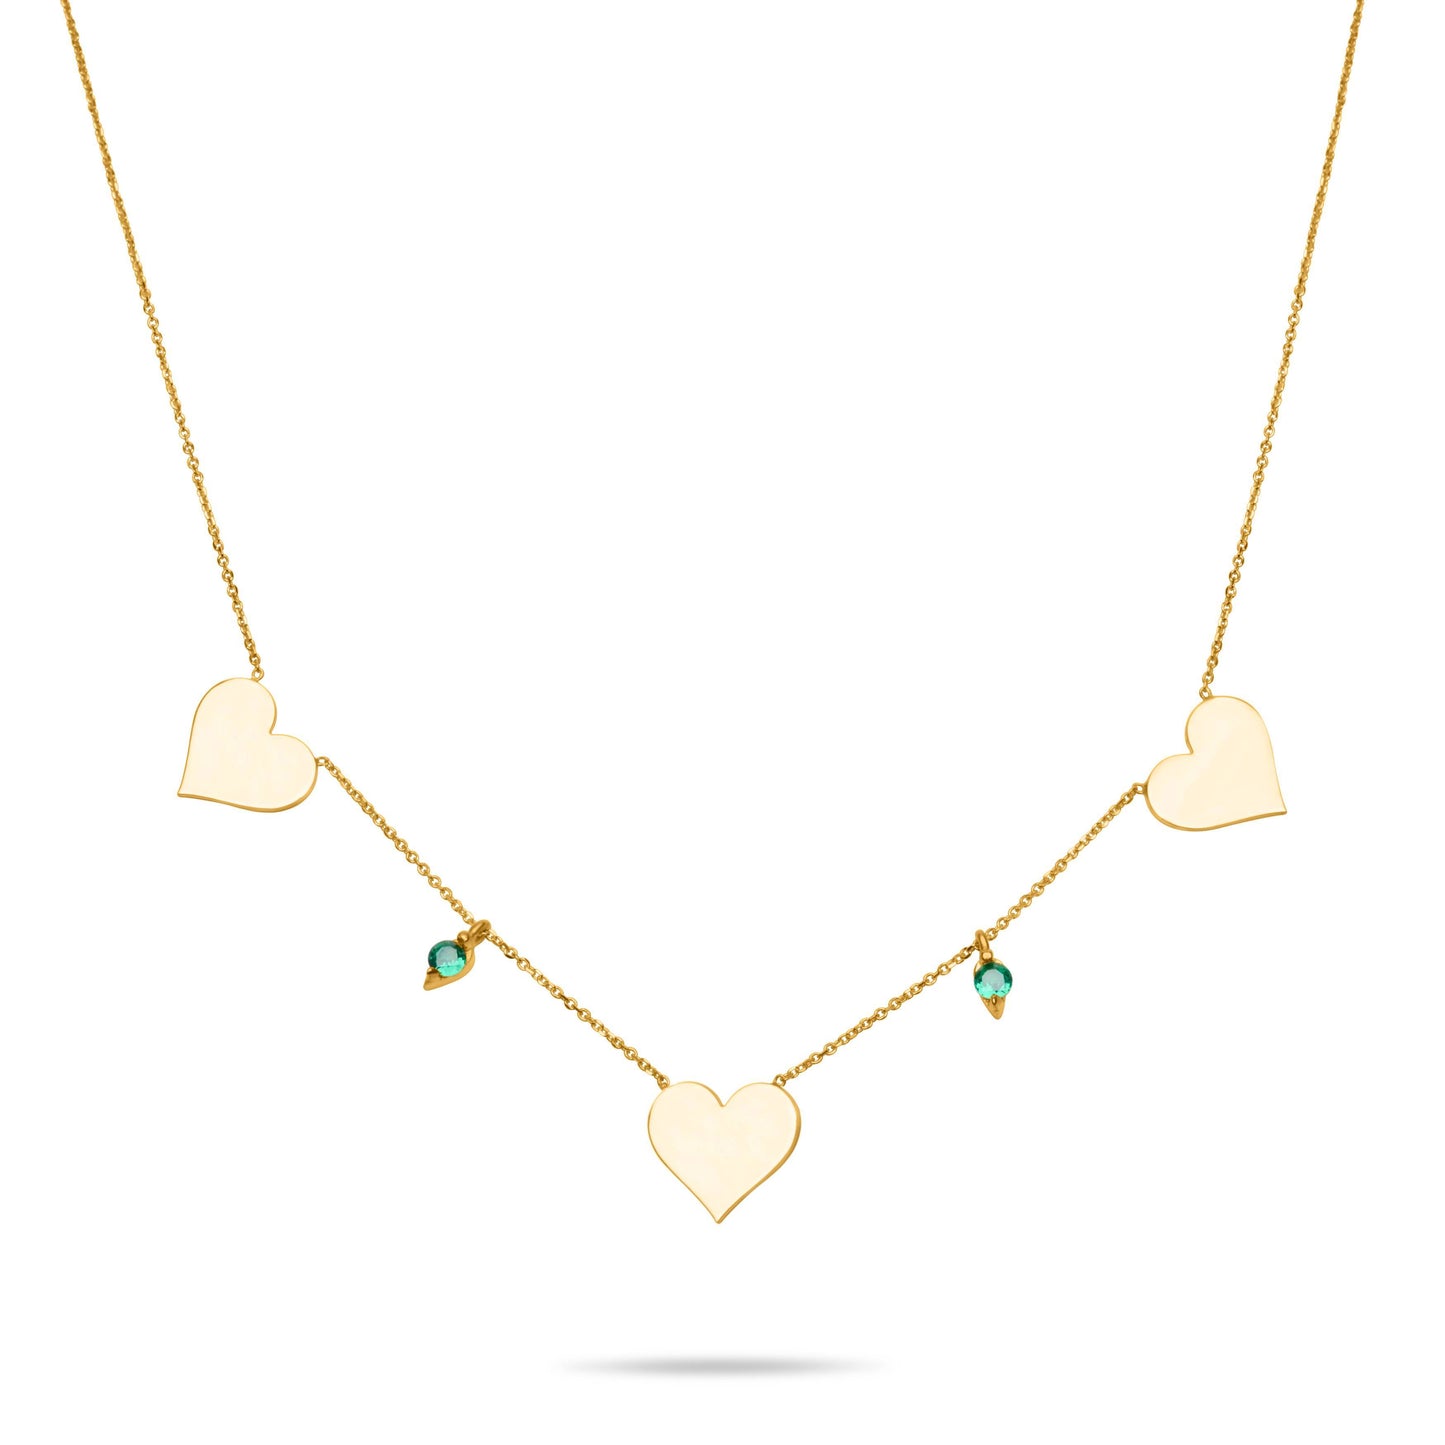 Three Hearts necklace with Emerald stones & Messages - Gold Plated